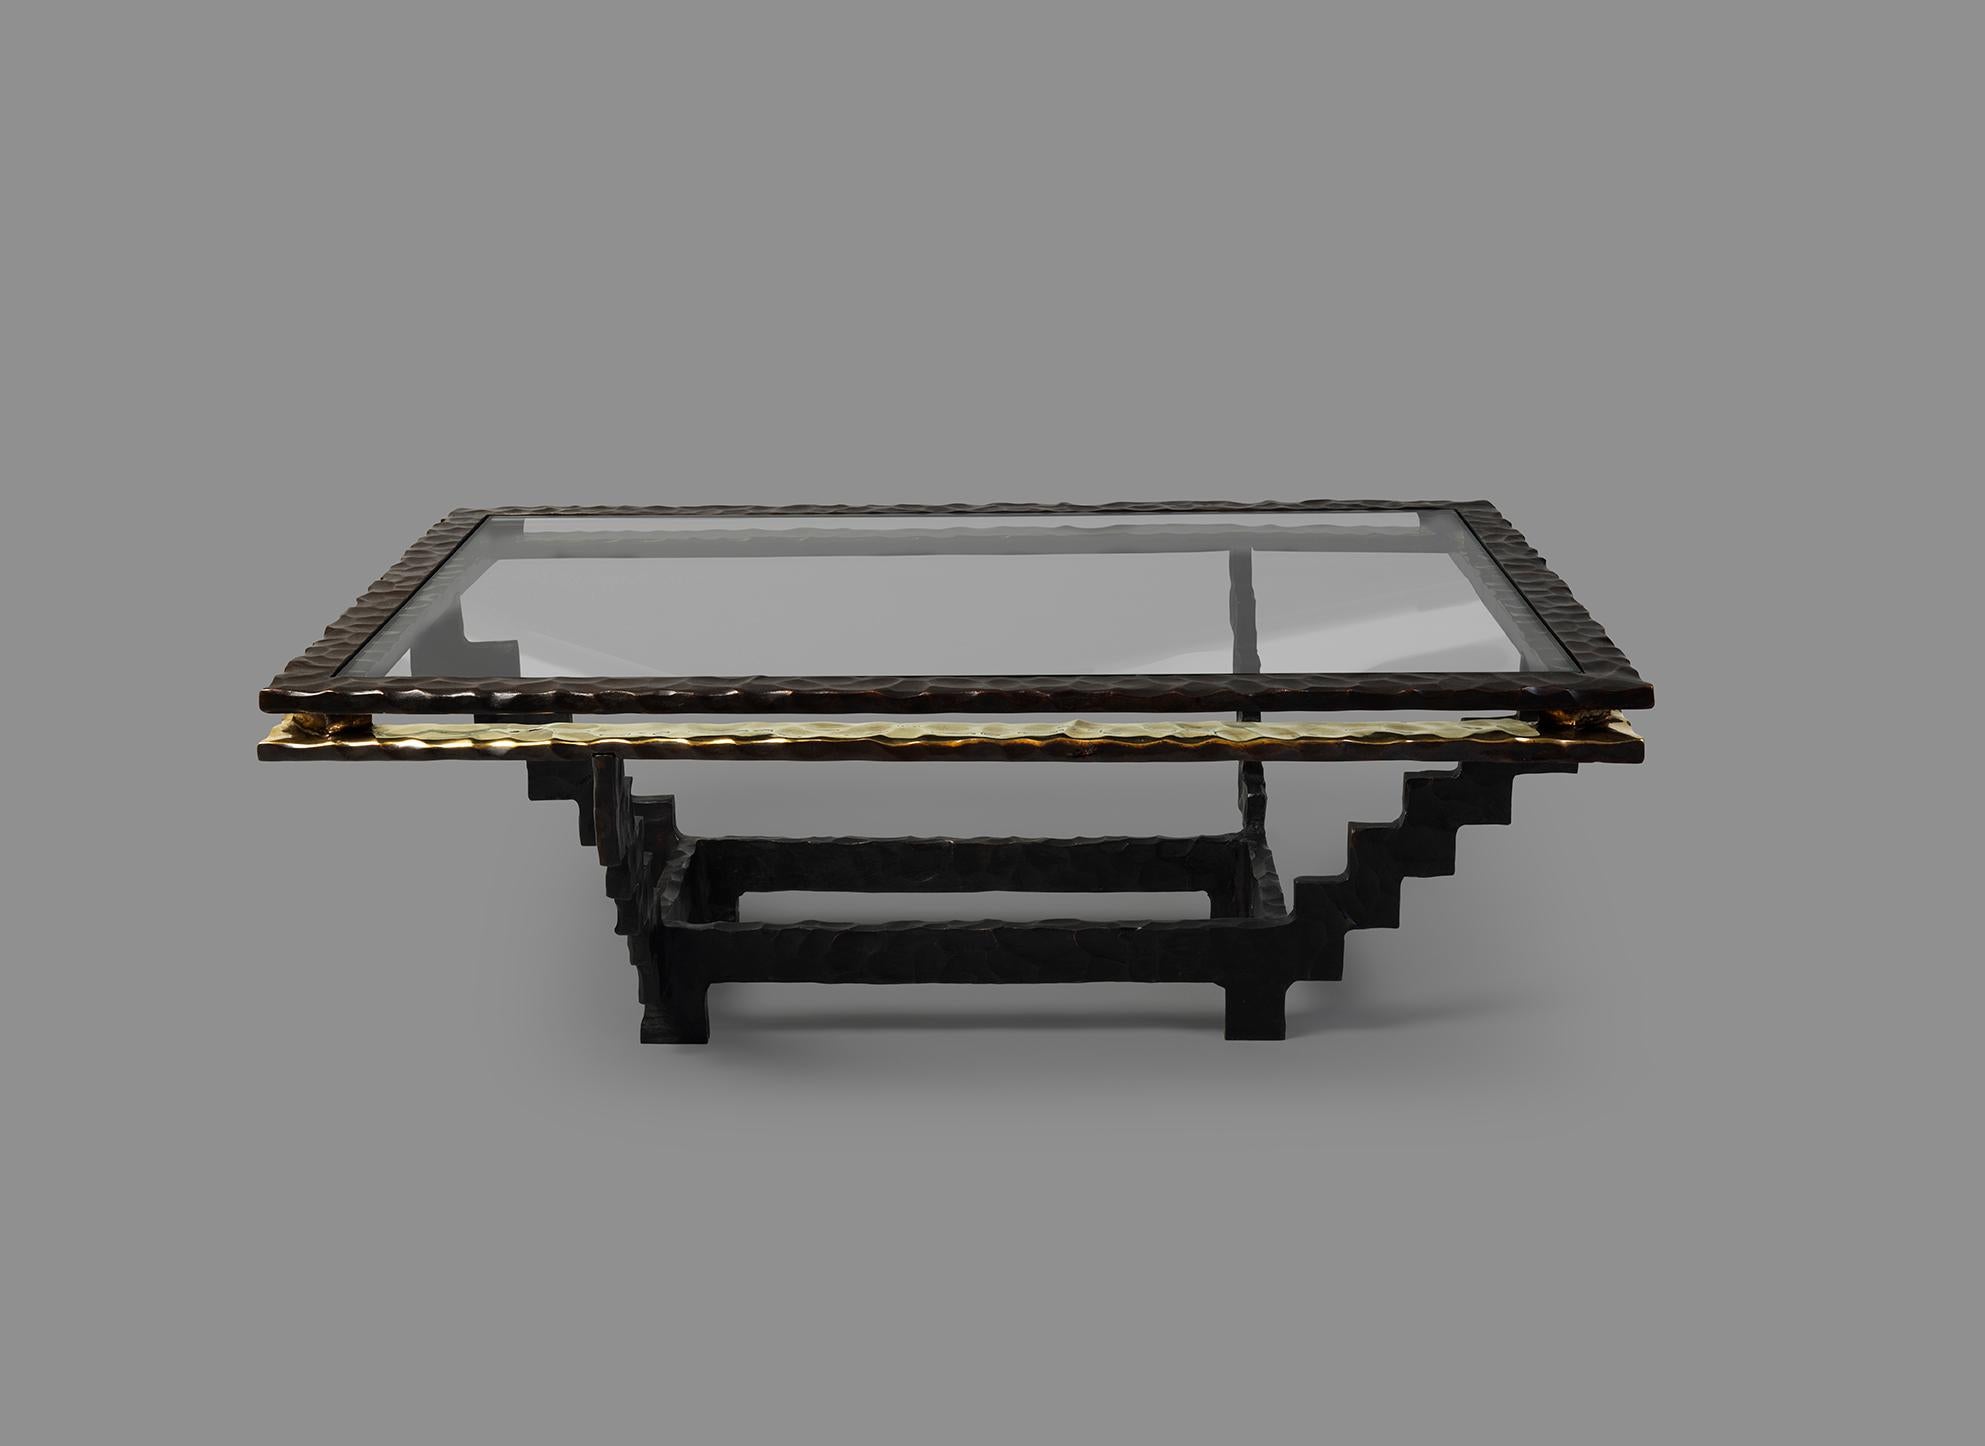 This sculptural bronze coffee table was inspired by the work of MC Escher and his 1953 lithograph 'Relativity', which depicts a world in which the normal laws of gravity do not apply. 

Cast in bronze by lost wax technique the interior of the top